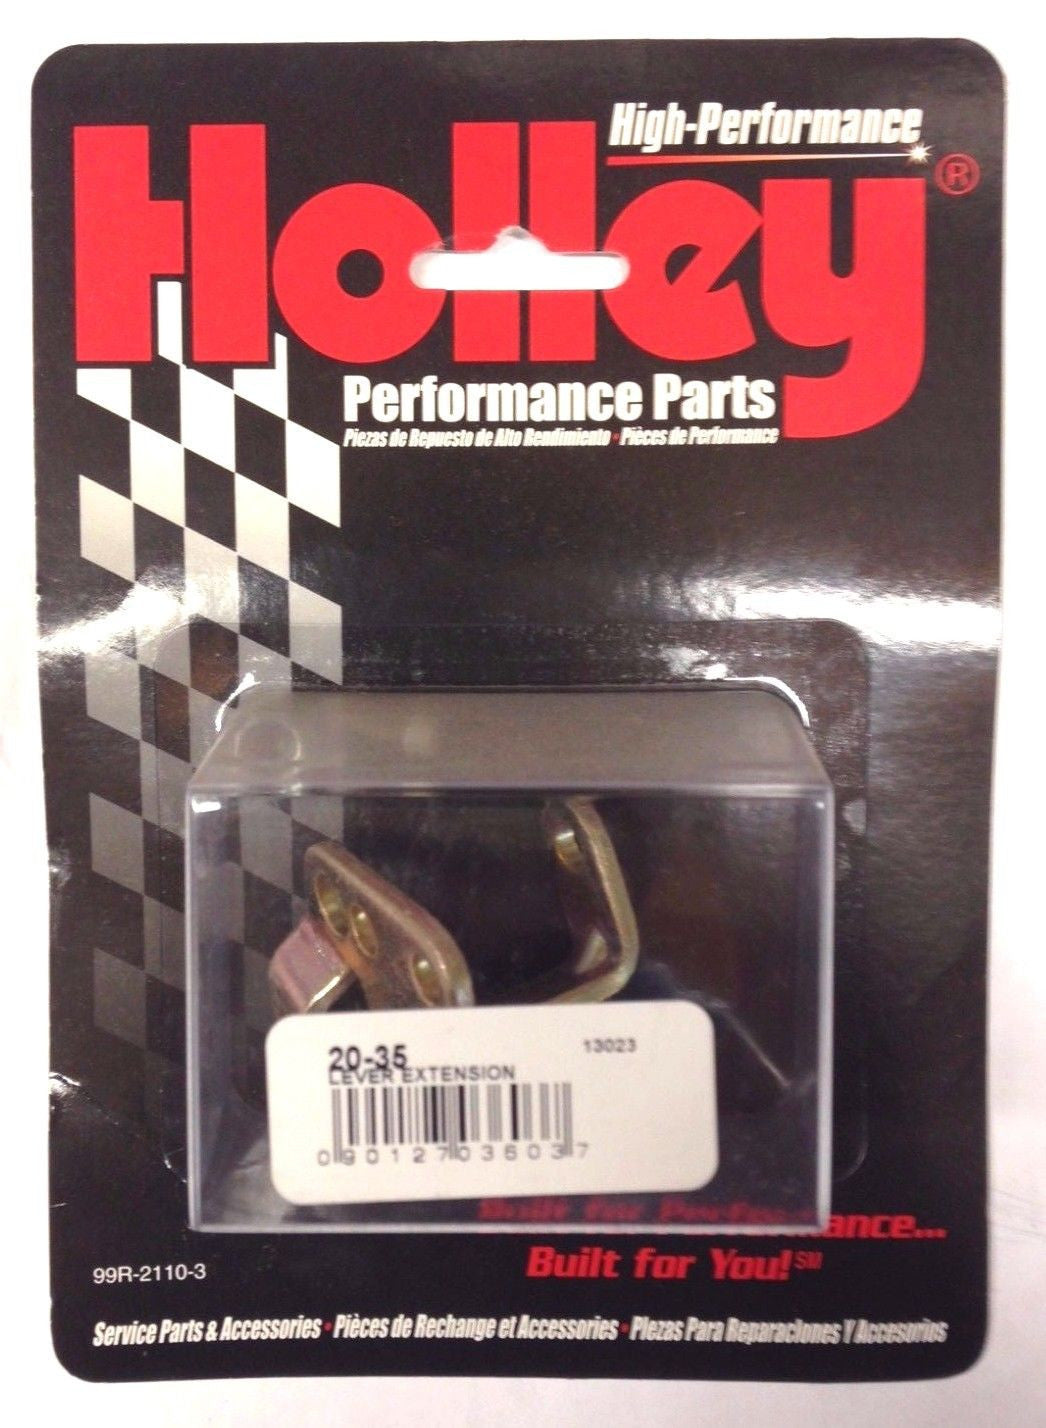 Holley 20-35 Transmission Kickdown Linkage Adapter